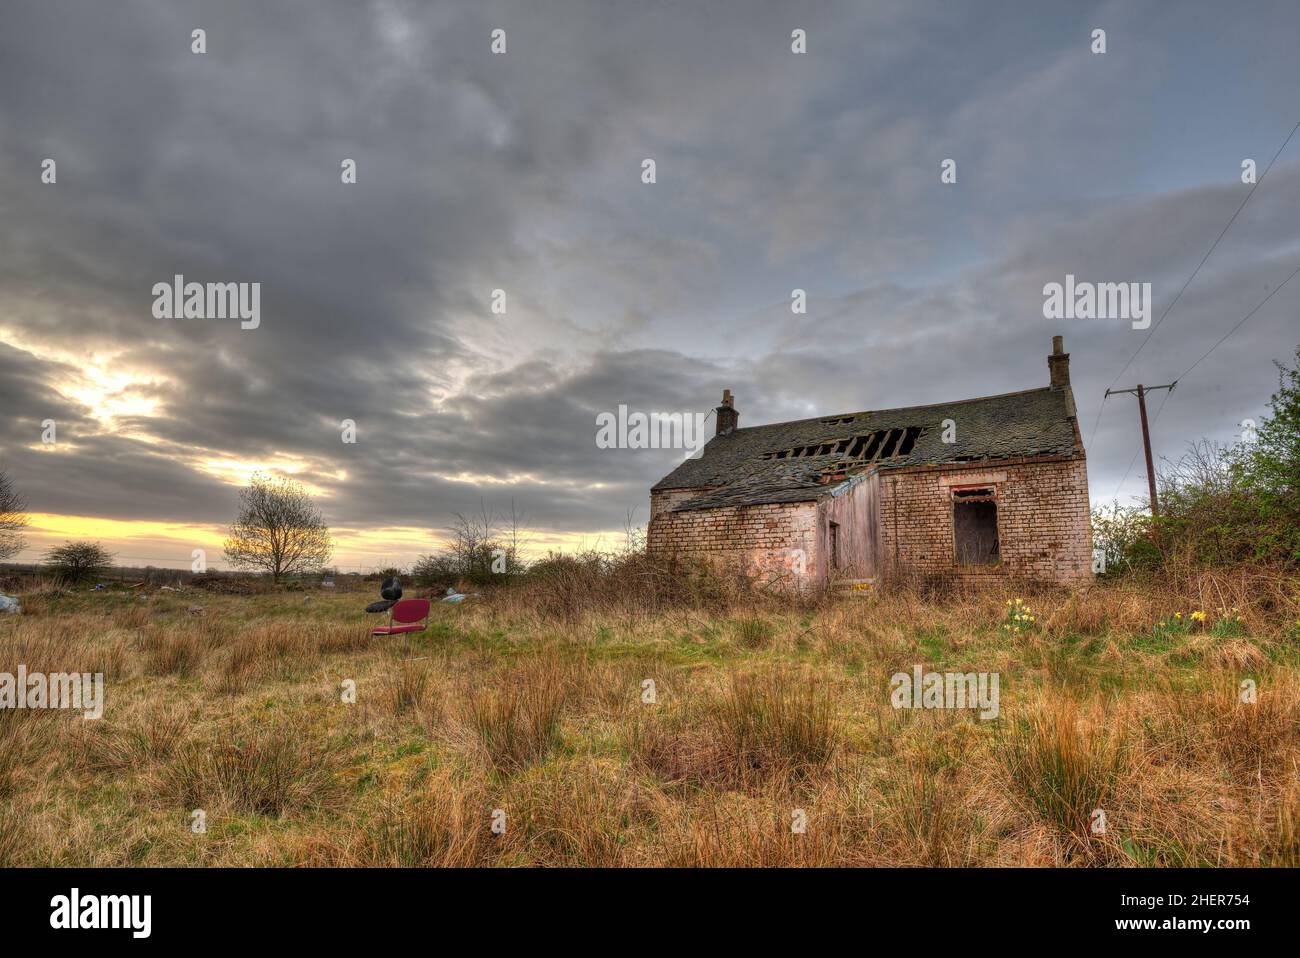 Remote derelict abndoned cottage in rural setting in Scotland. Stock Photo